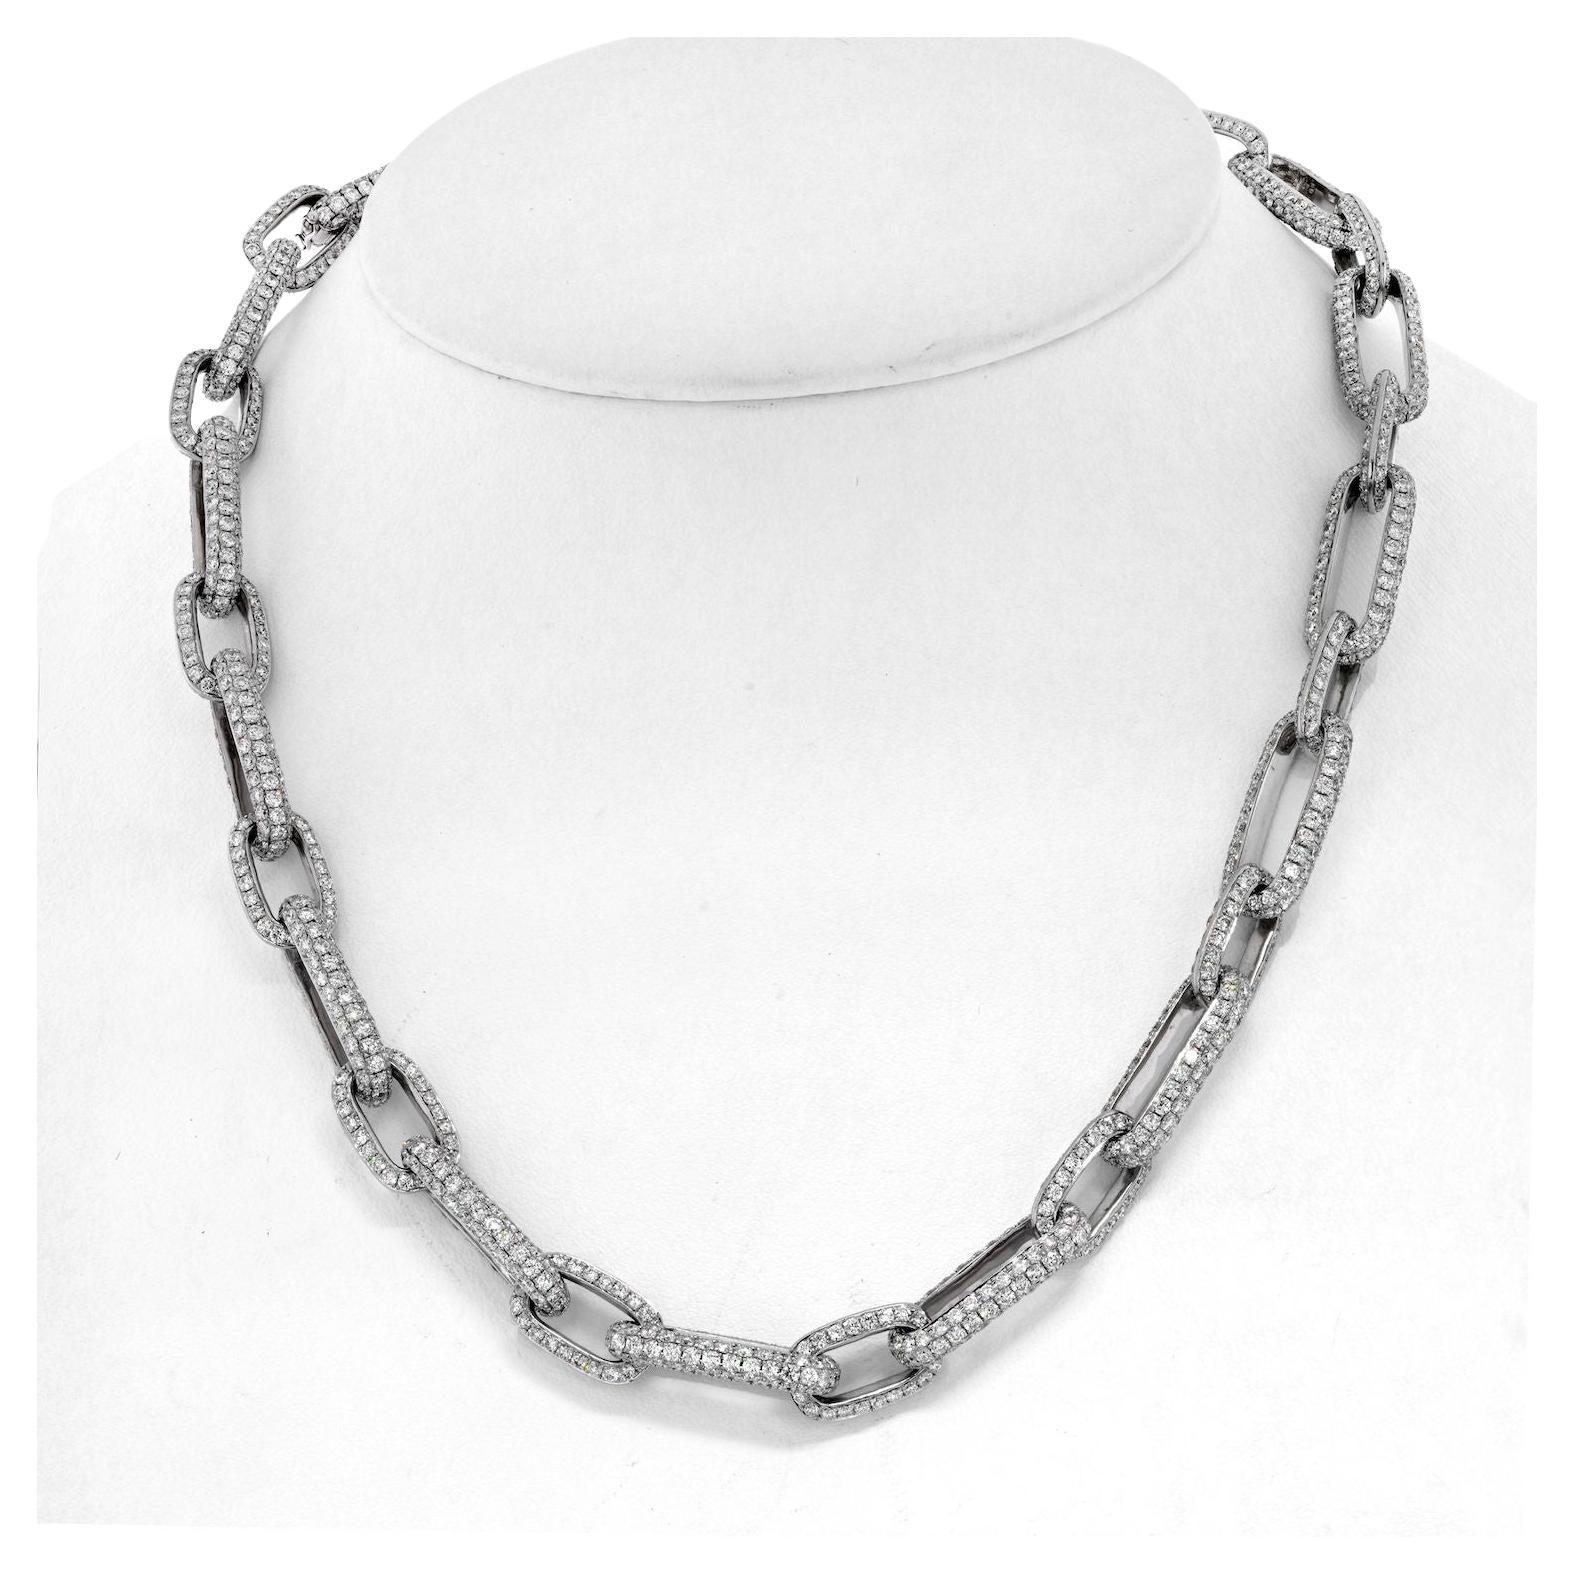 41 Carat 18K White Gold Pave Diamond Link Chain Necklace For Sale